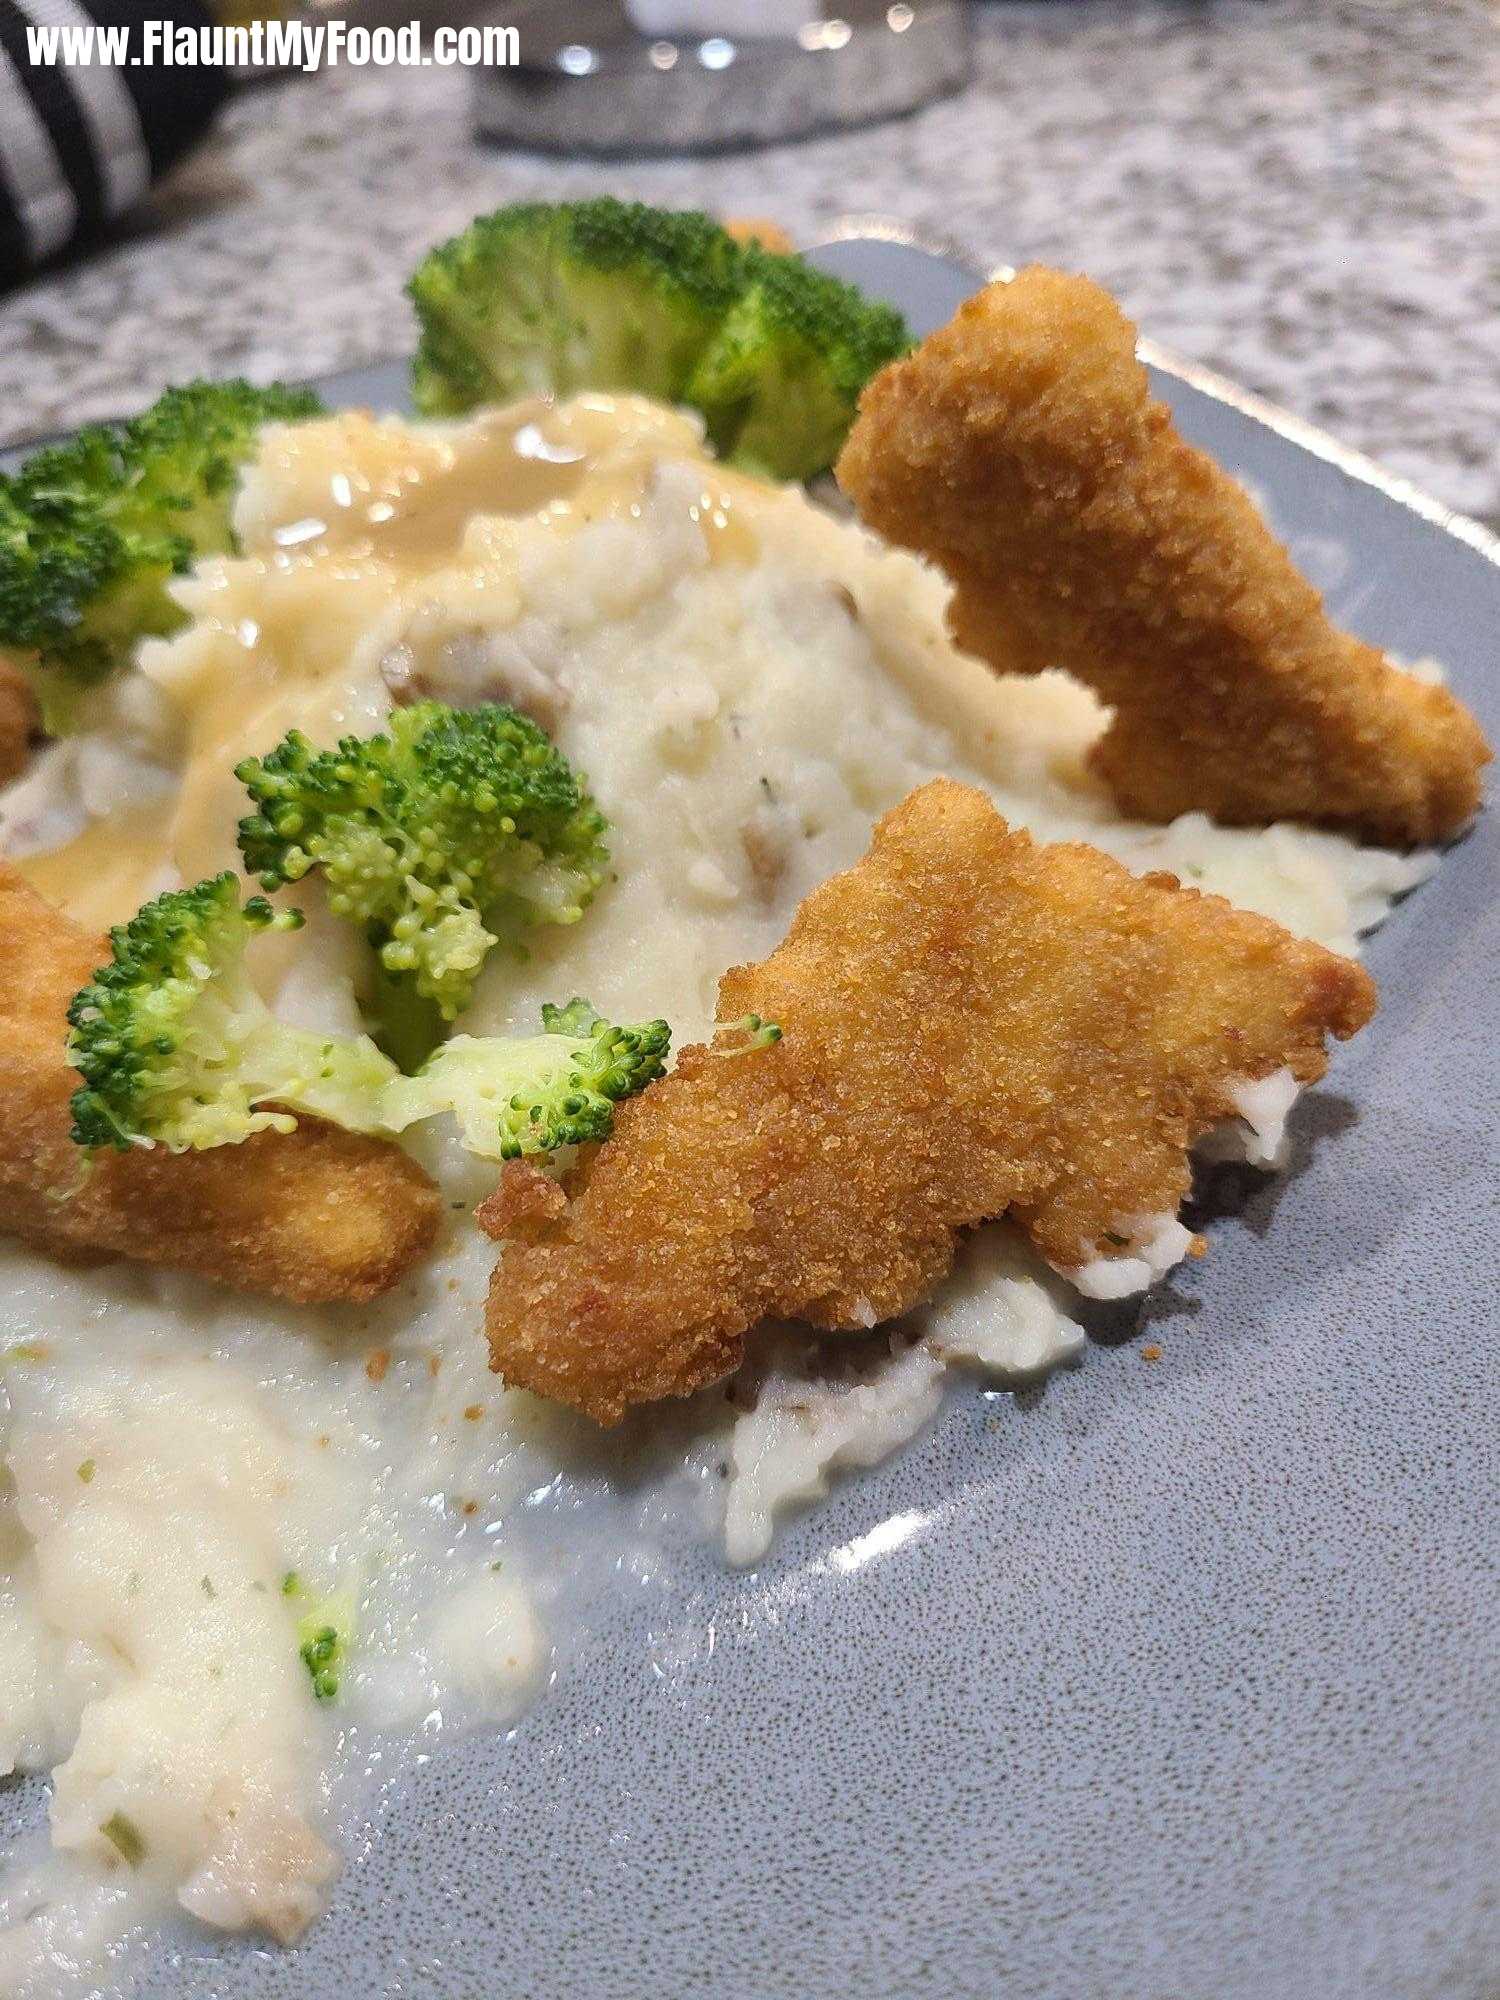 Gourmet mealHome made mashed spuds with a gravy reduction, with brocoli florets, pair with battered chicken cut into the shape of extinct creatures roaming the plate.